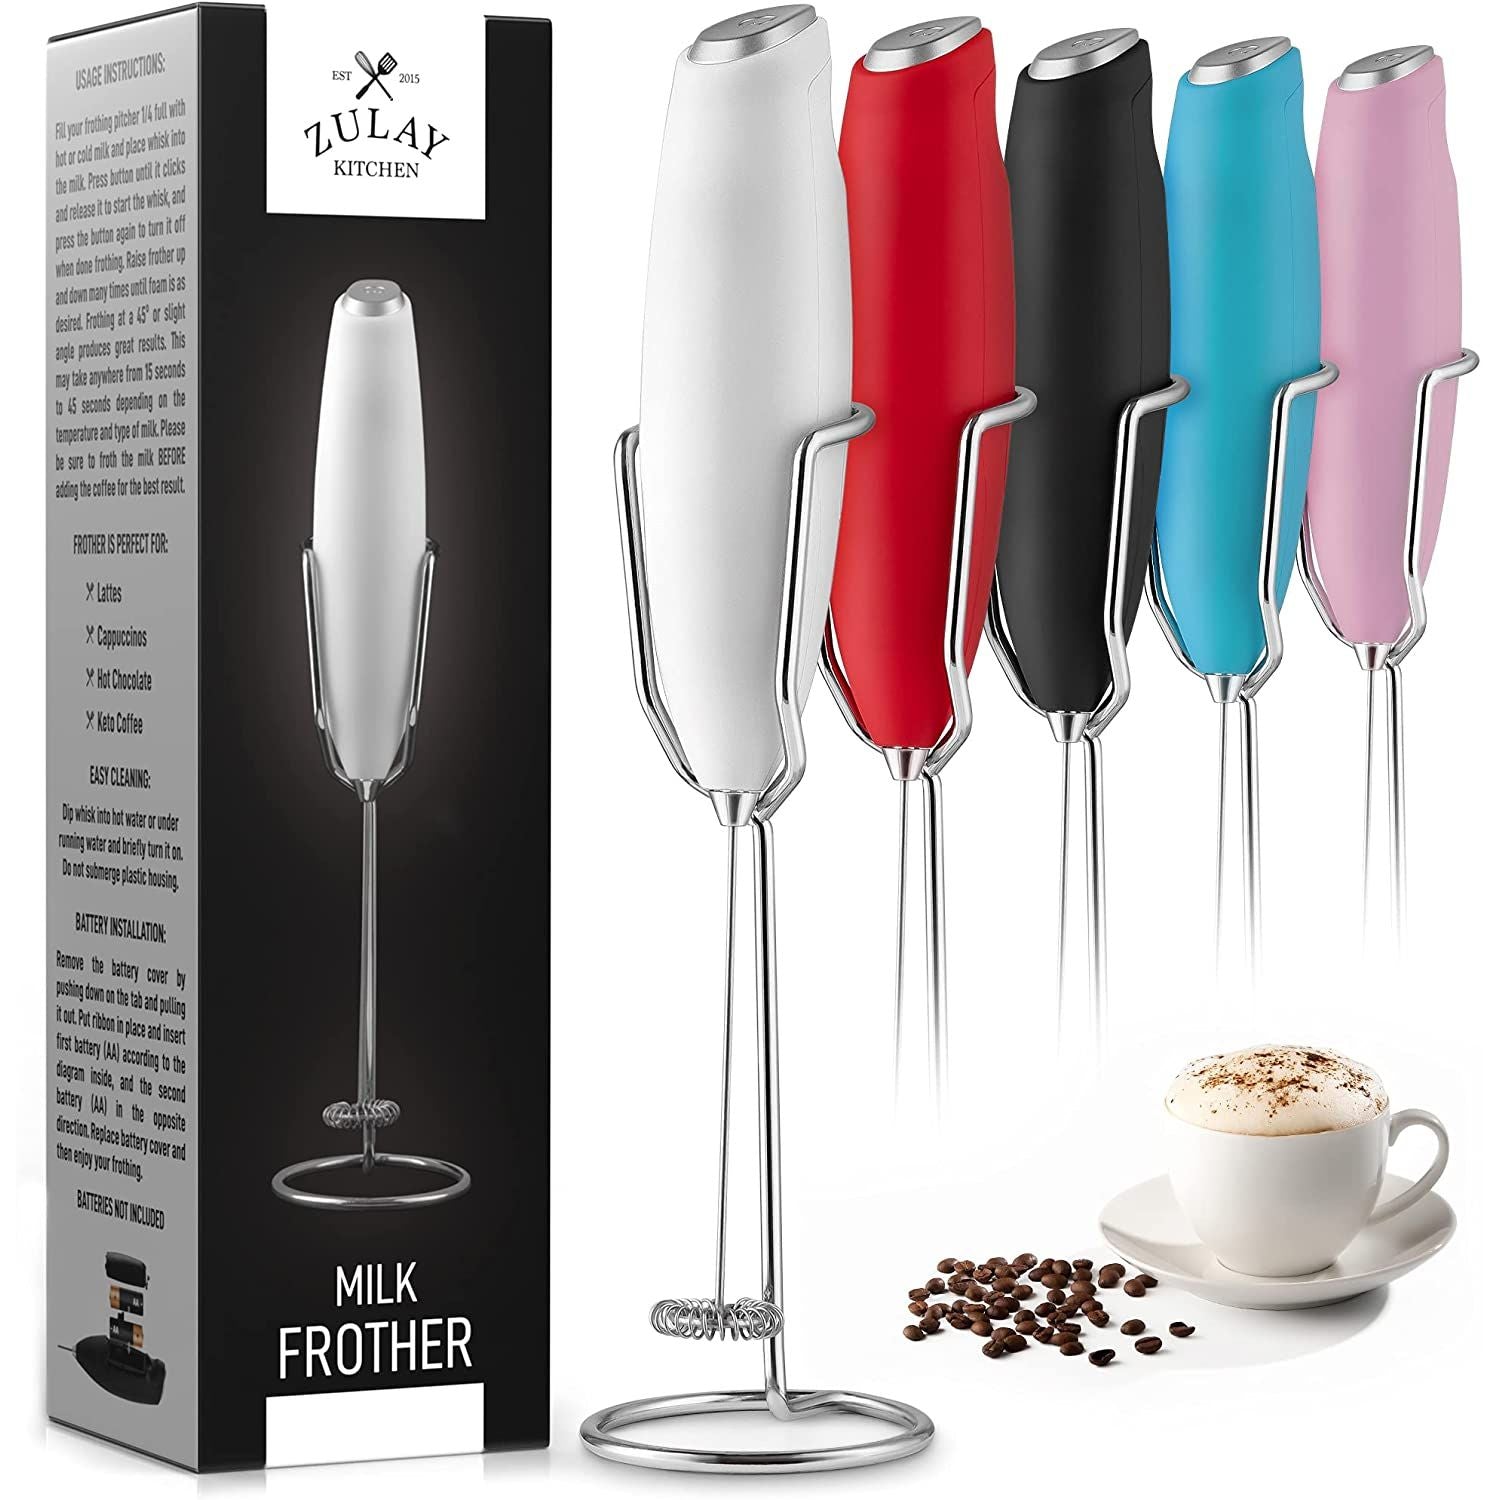 Zulay Kitchen Milk Frother With Holster Stand - Granite, 1 - Ralphs